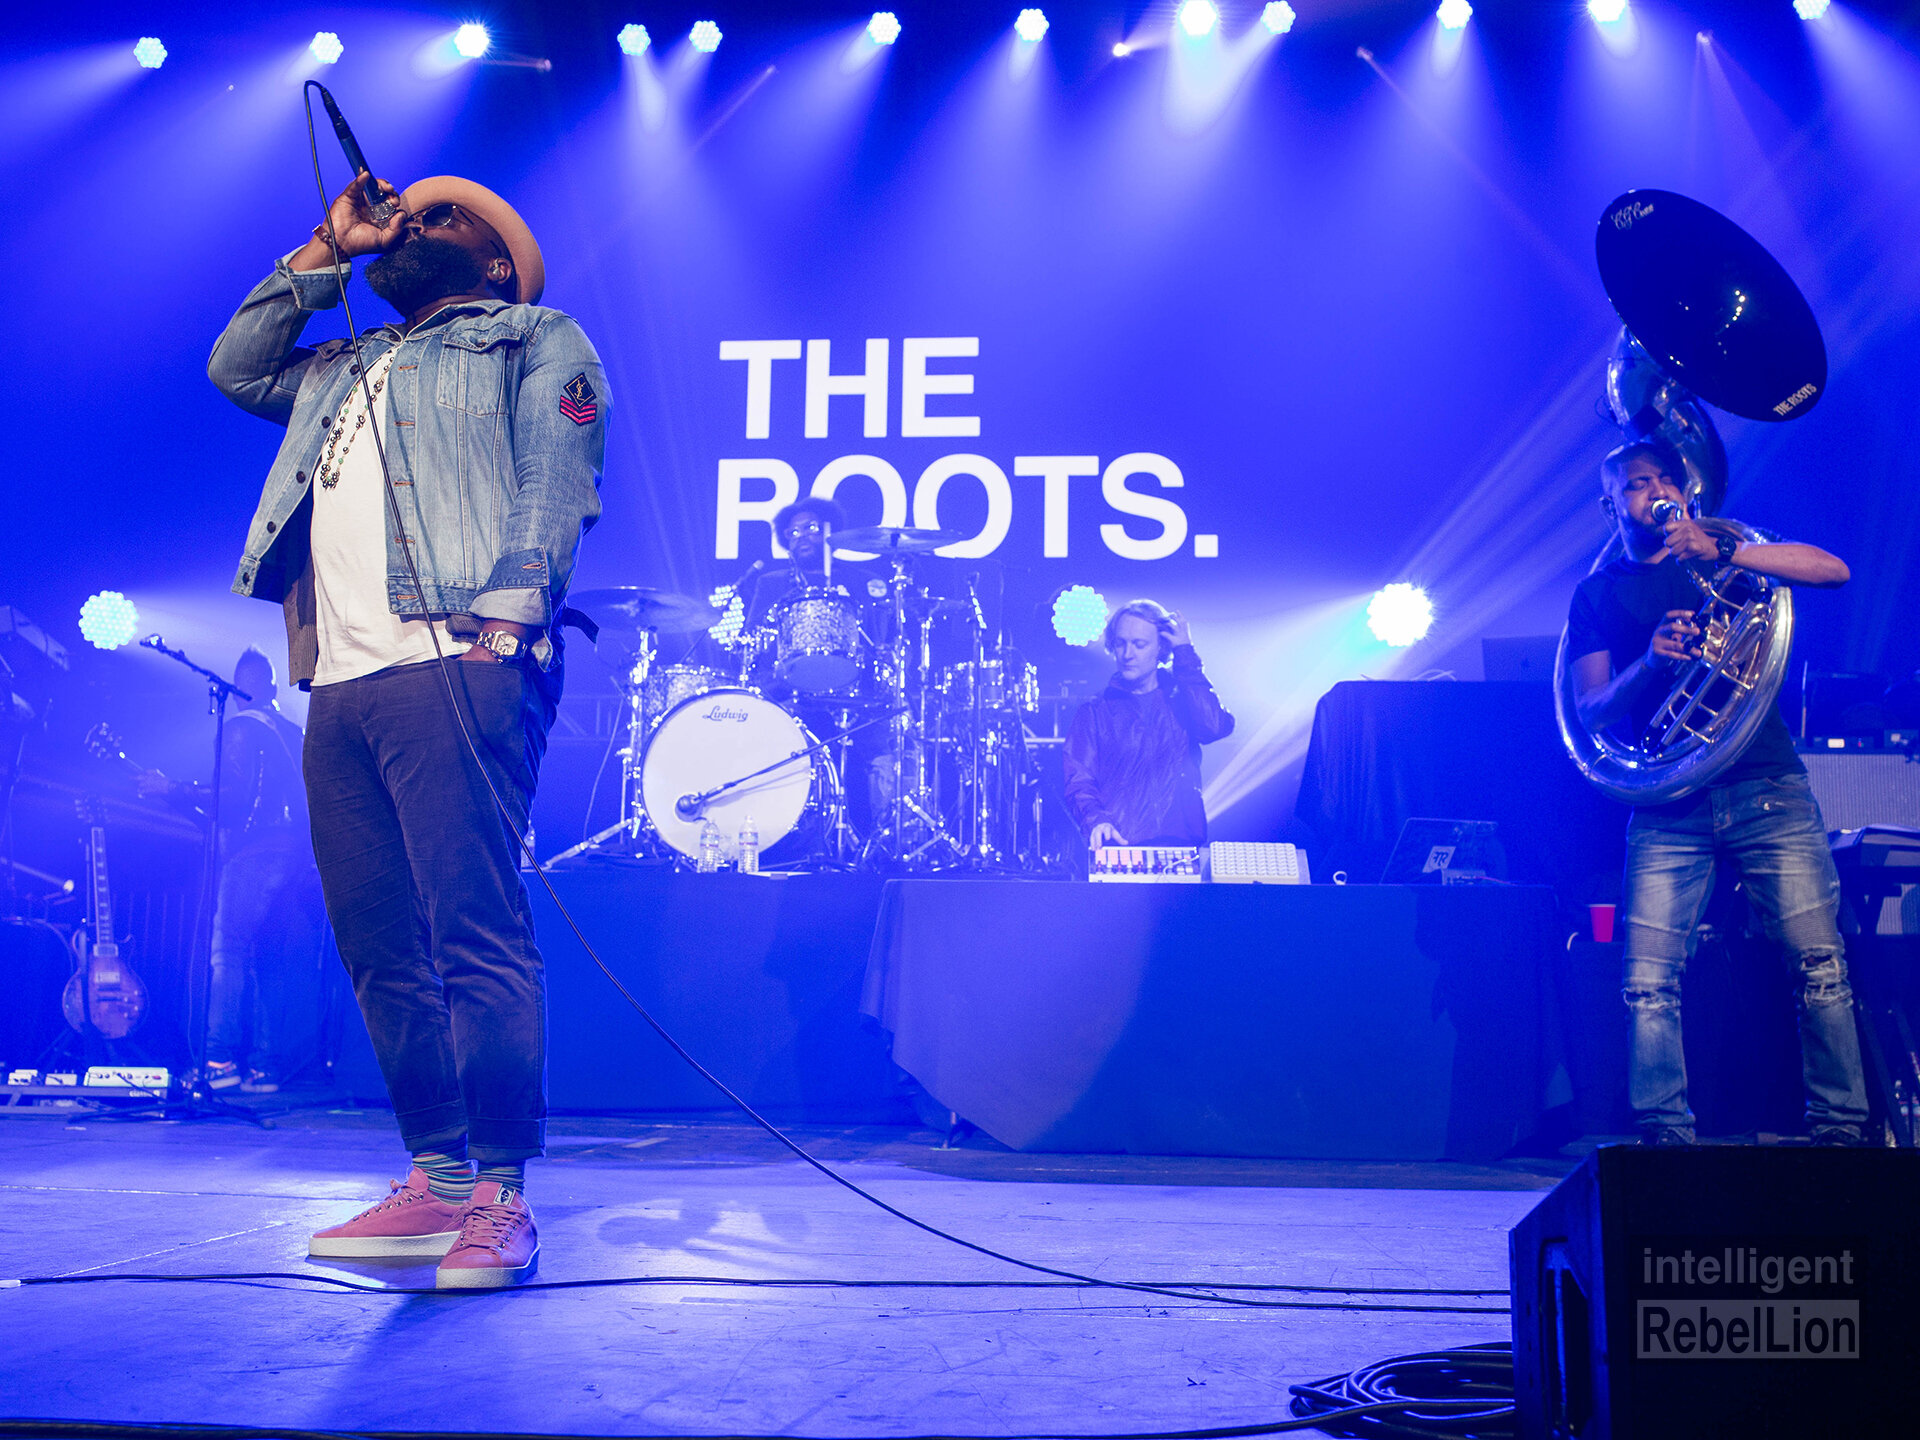 theroots.jpg